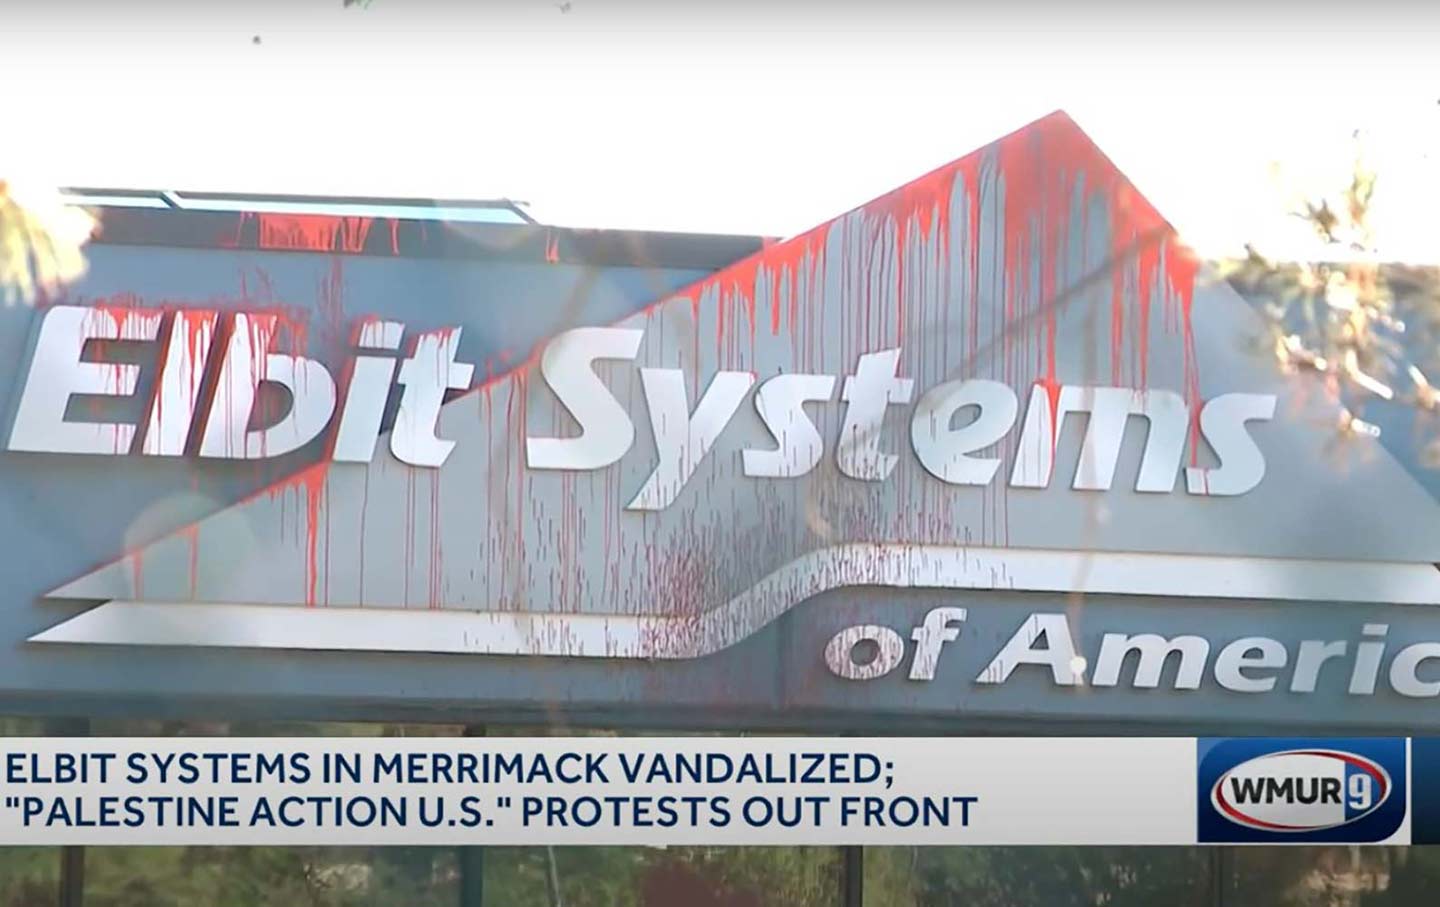 Elbit Systems of America facility in Merrimack, New Hampshire, after protesters showed up.